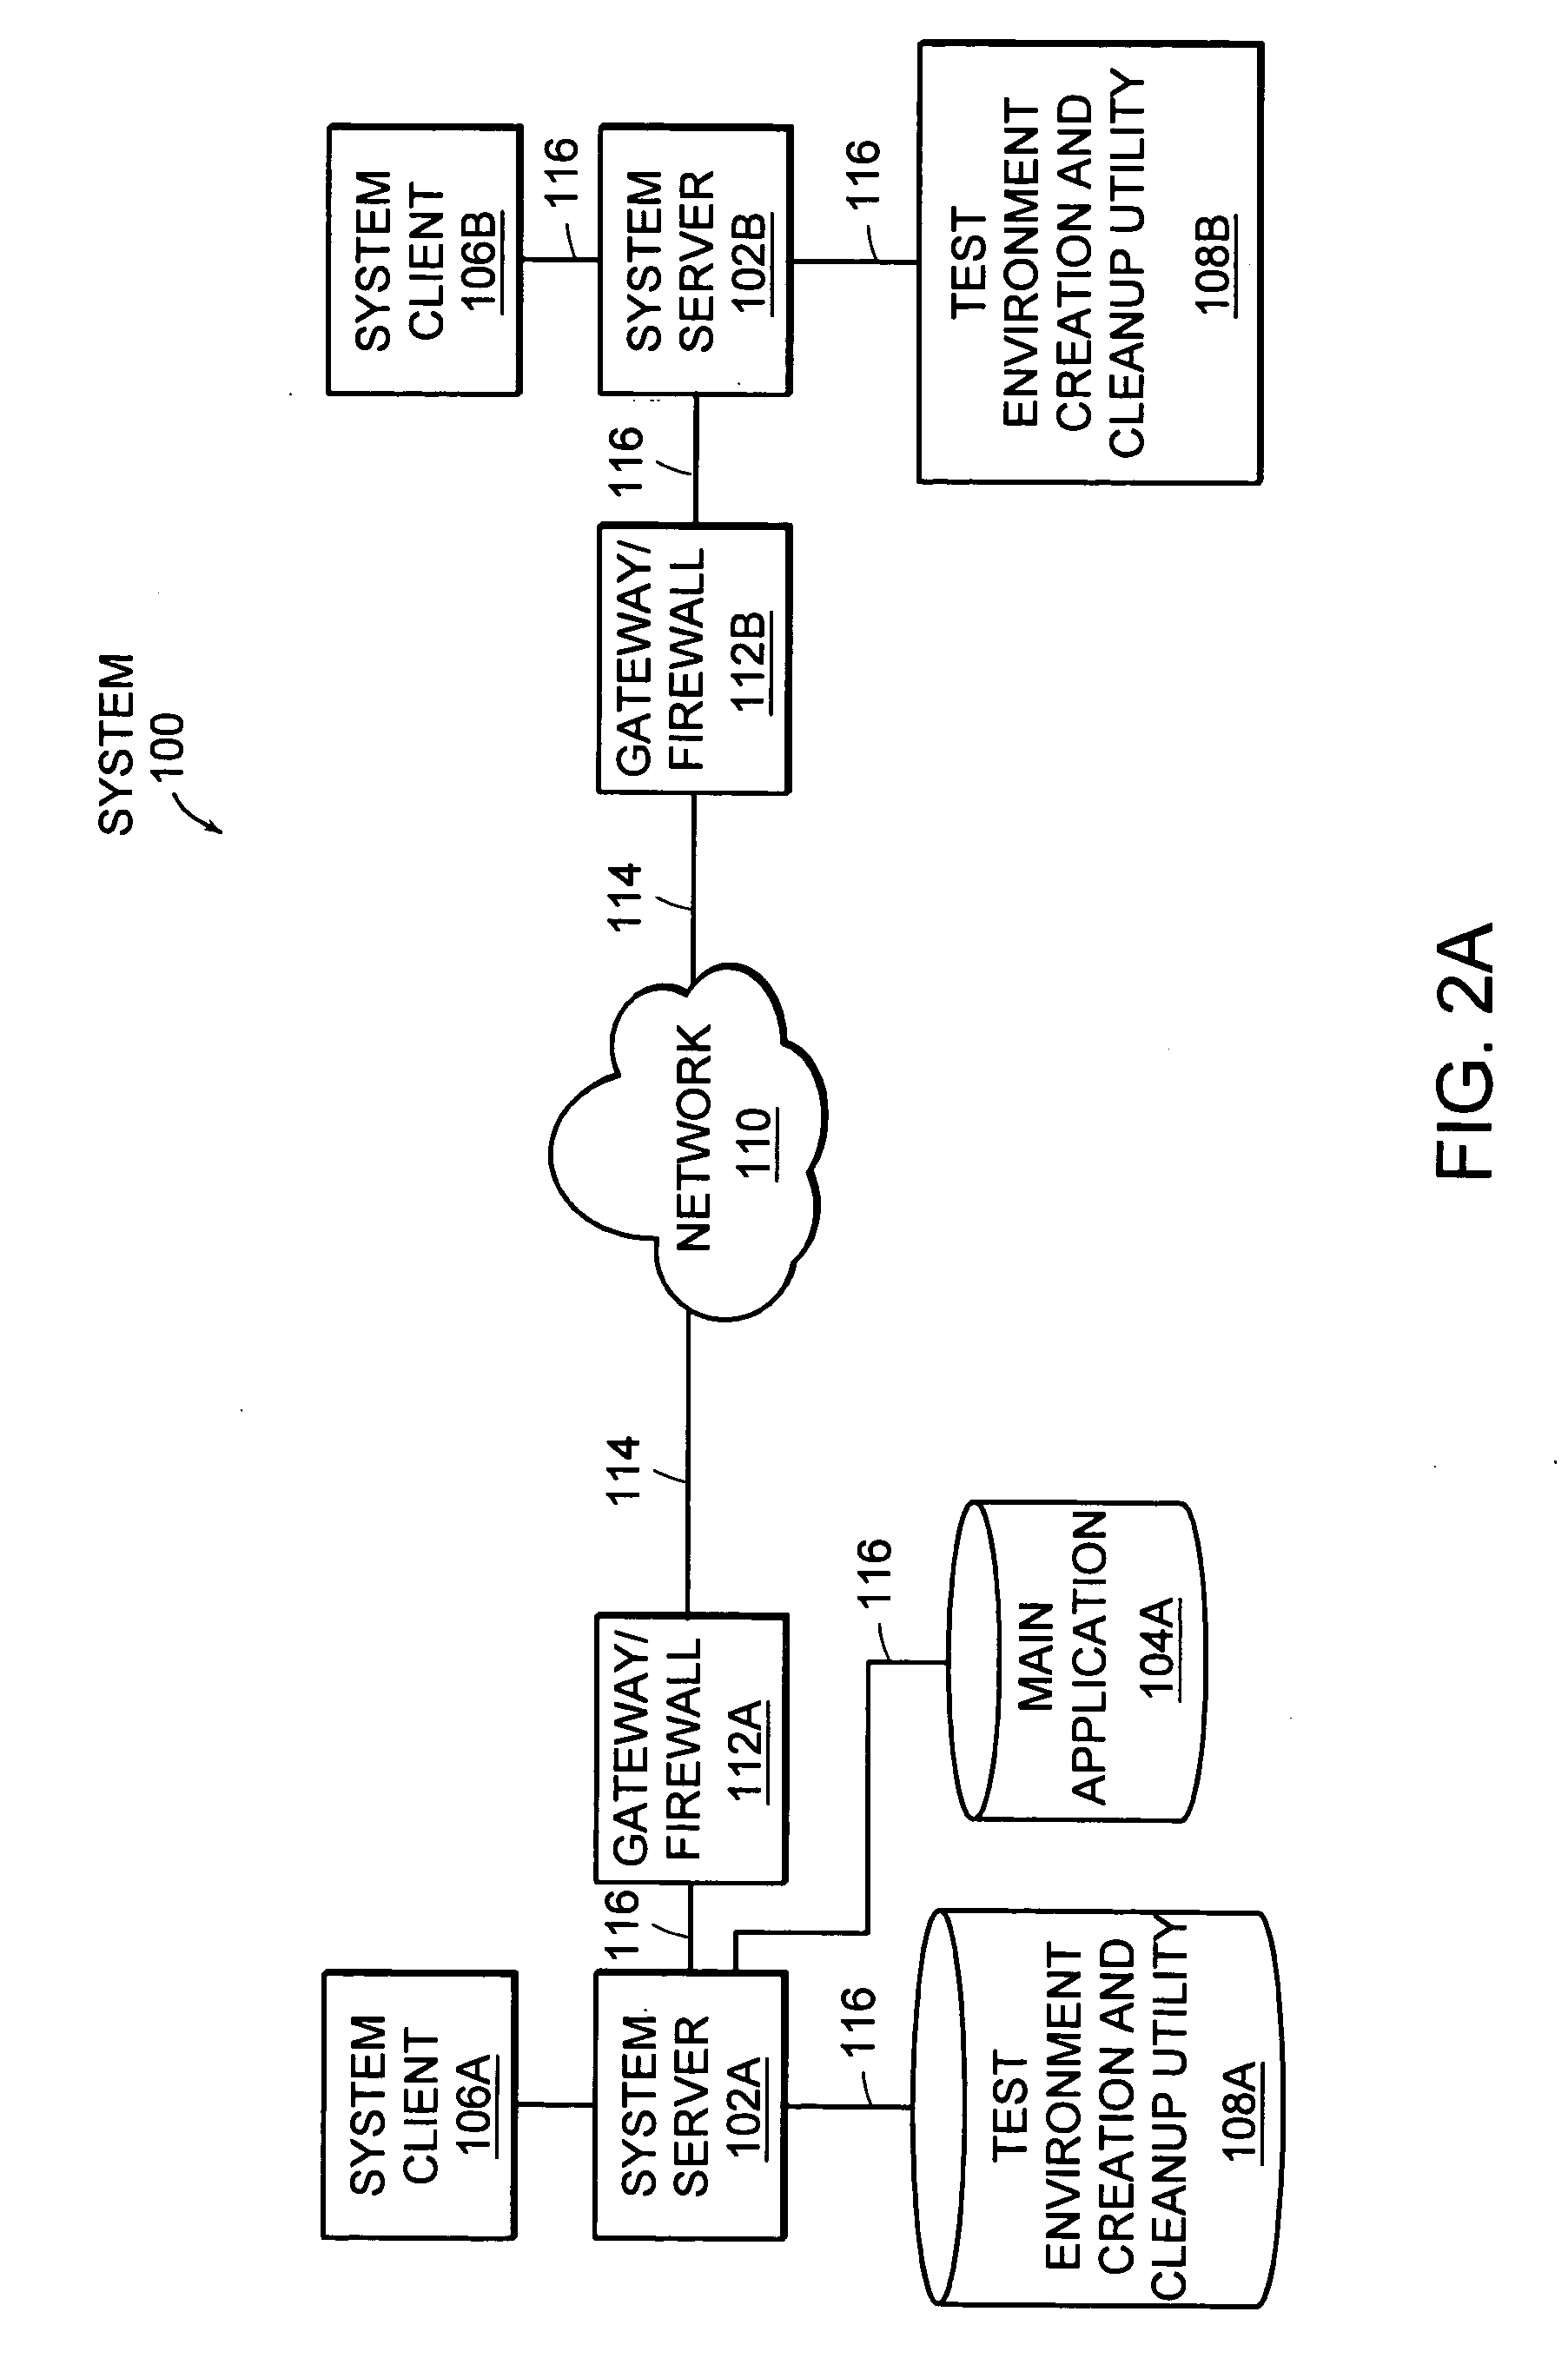 System and method for creating and restoring a test environment